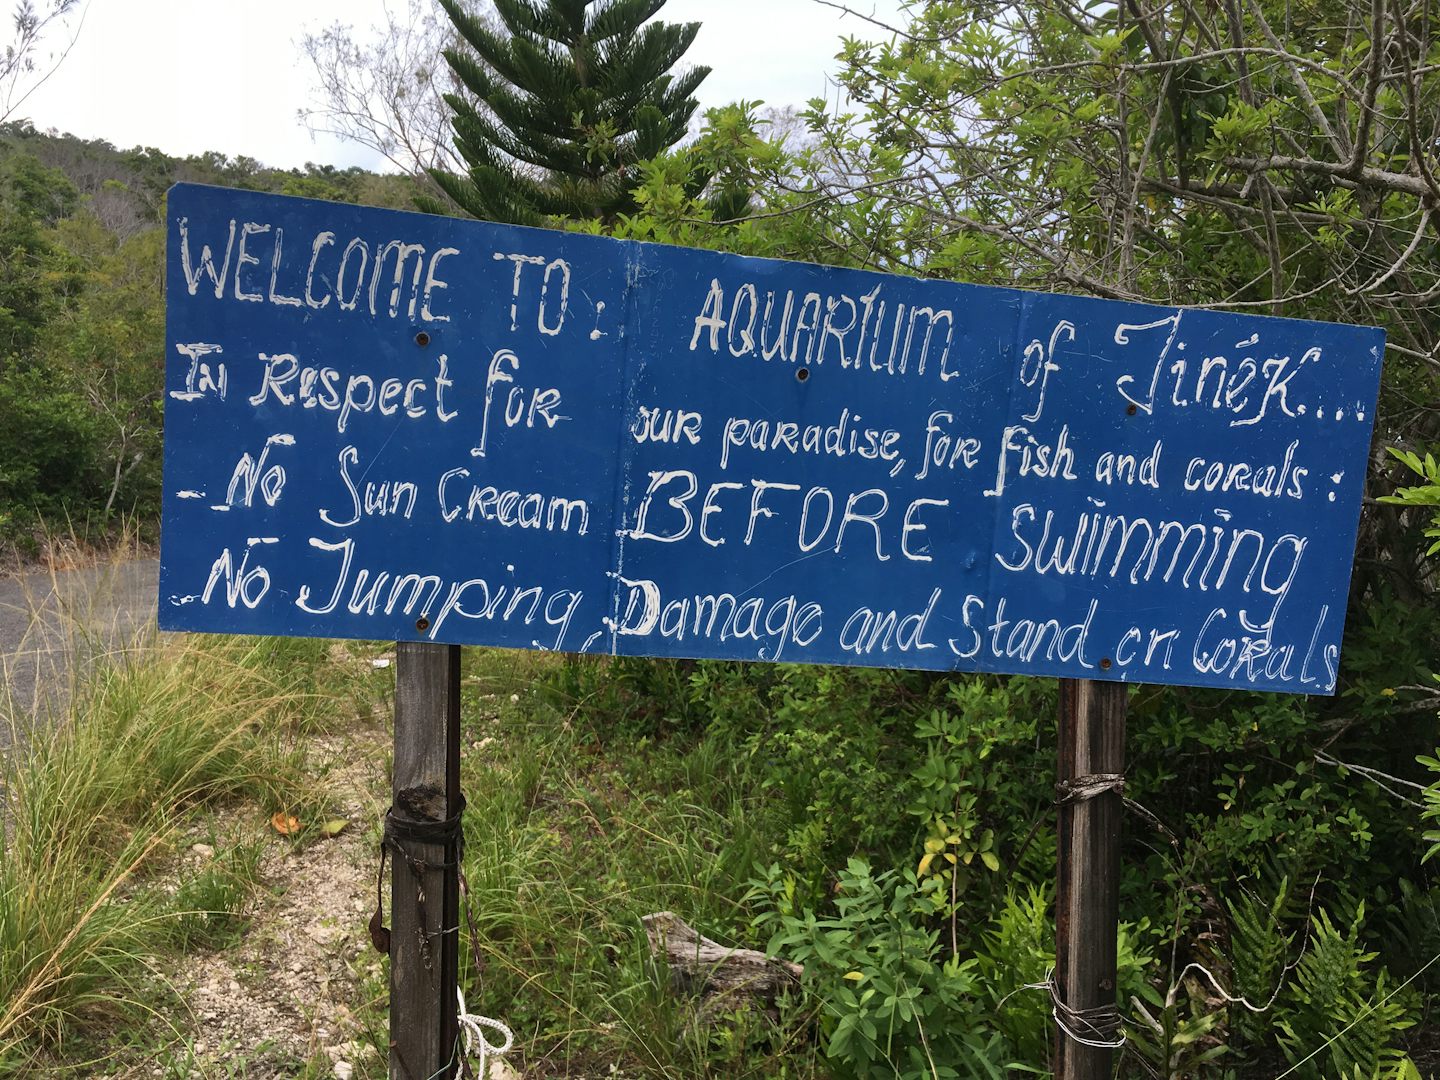 At Jinek Bay in Lifou, the locals plead for no reef-damaging sunscreens and